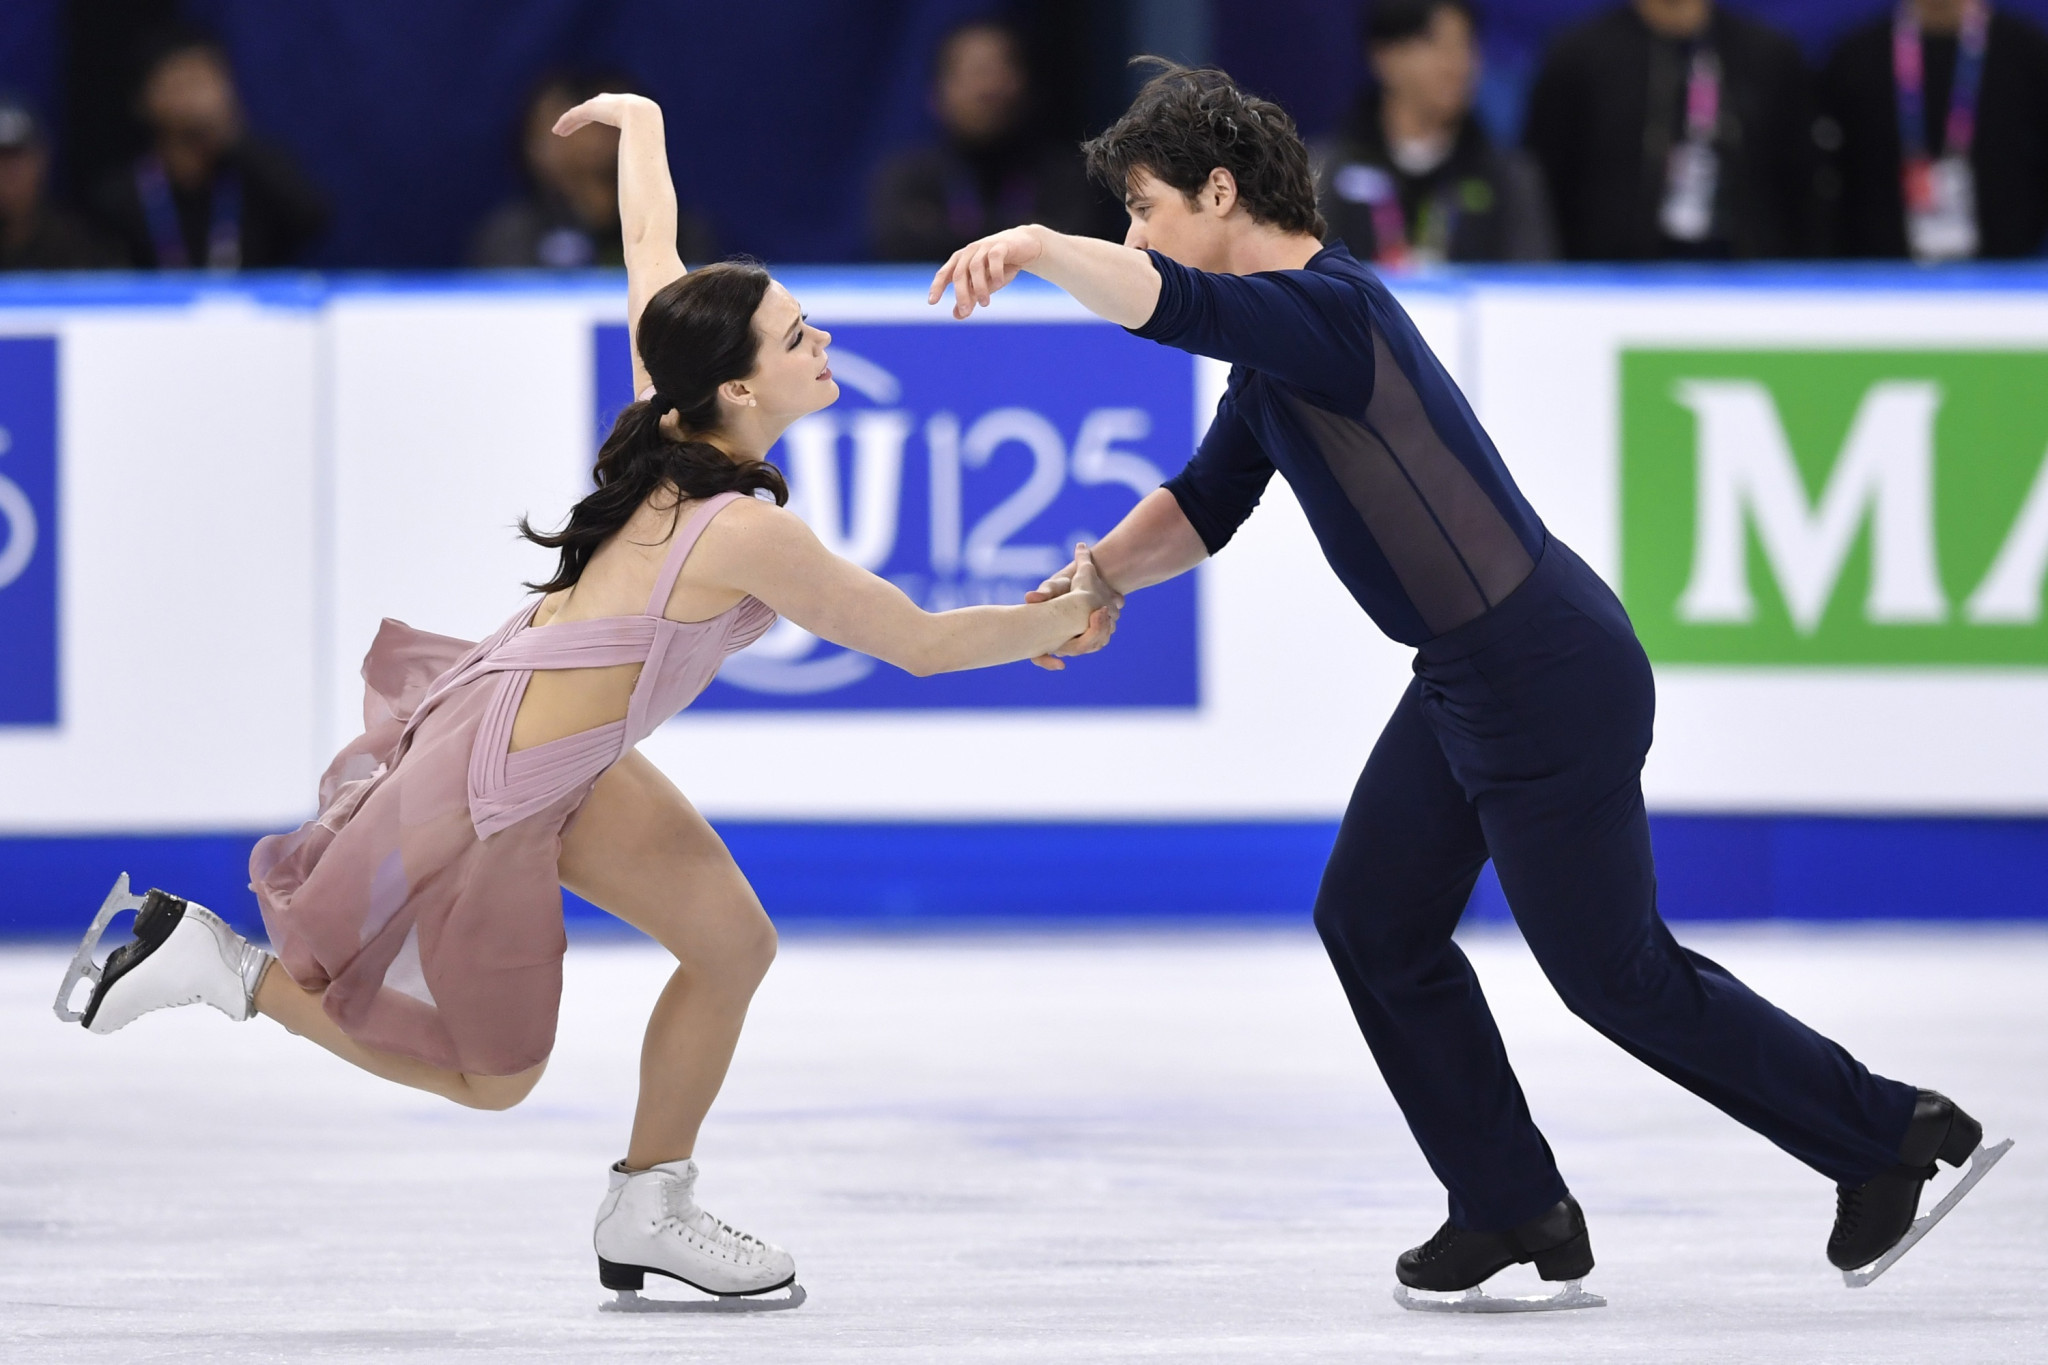 World ice dance champions Tessa Virtue and Canadians Scott Moir will be looking to follow up their victory at Skate Canada International with another good performance at the NHK Trophy in Osaka ©Getty Images